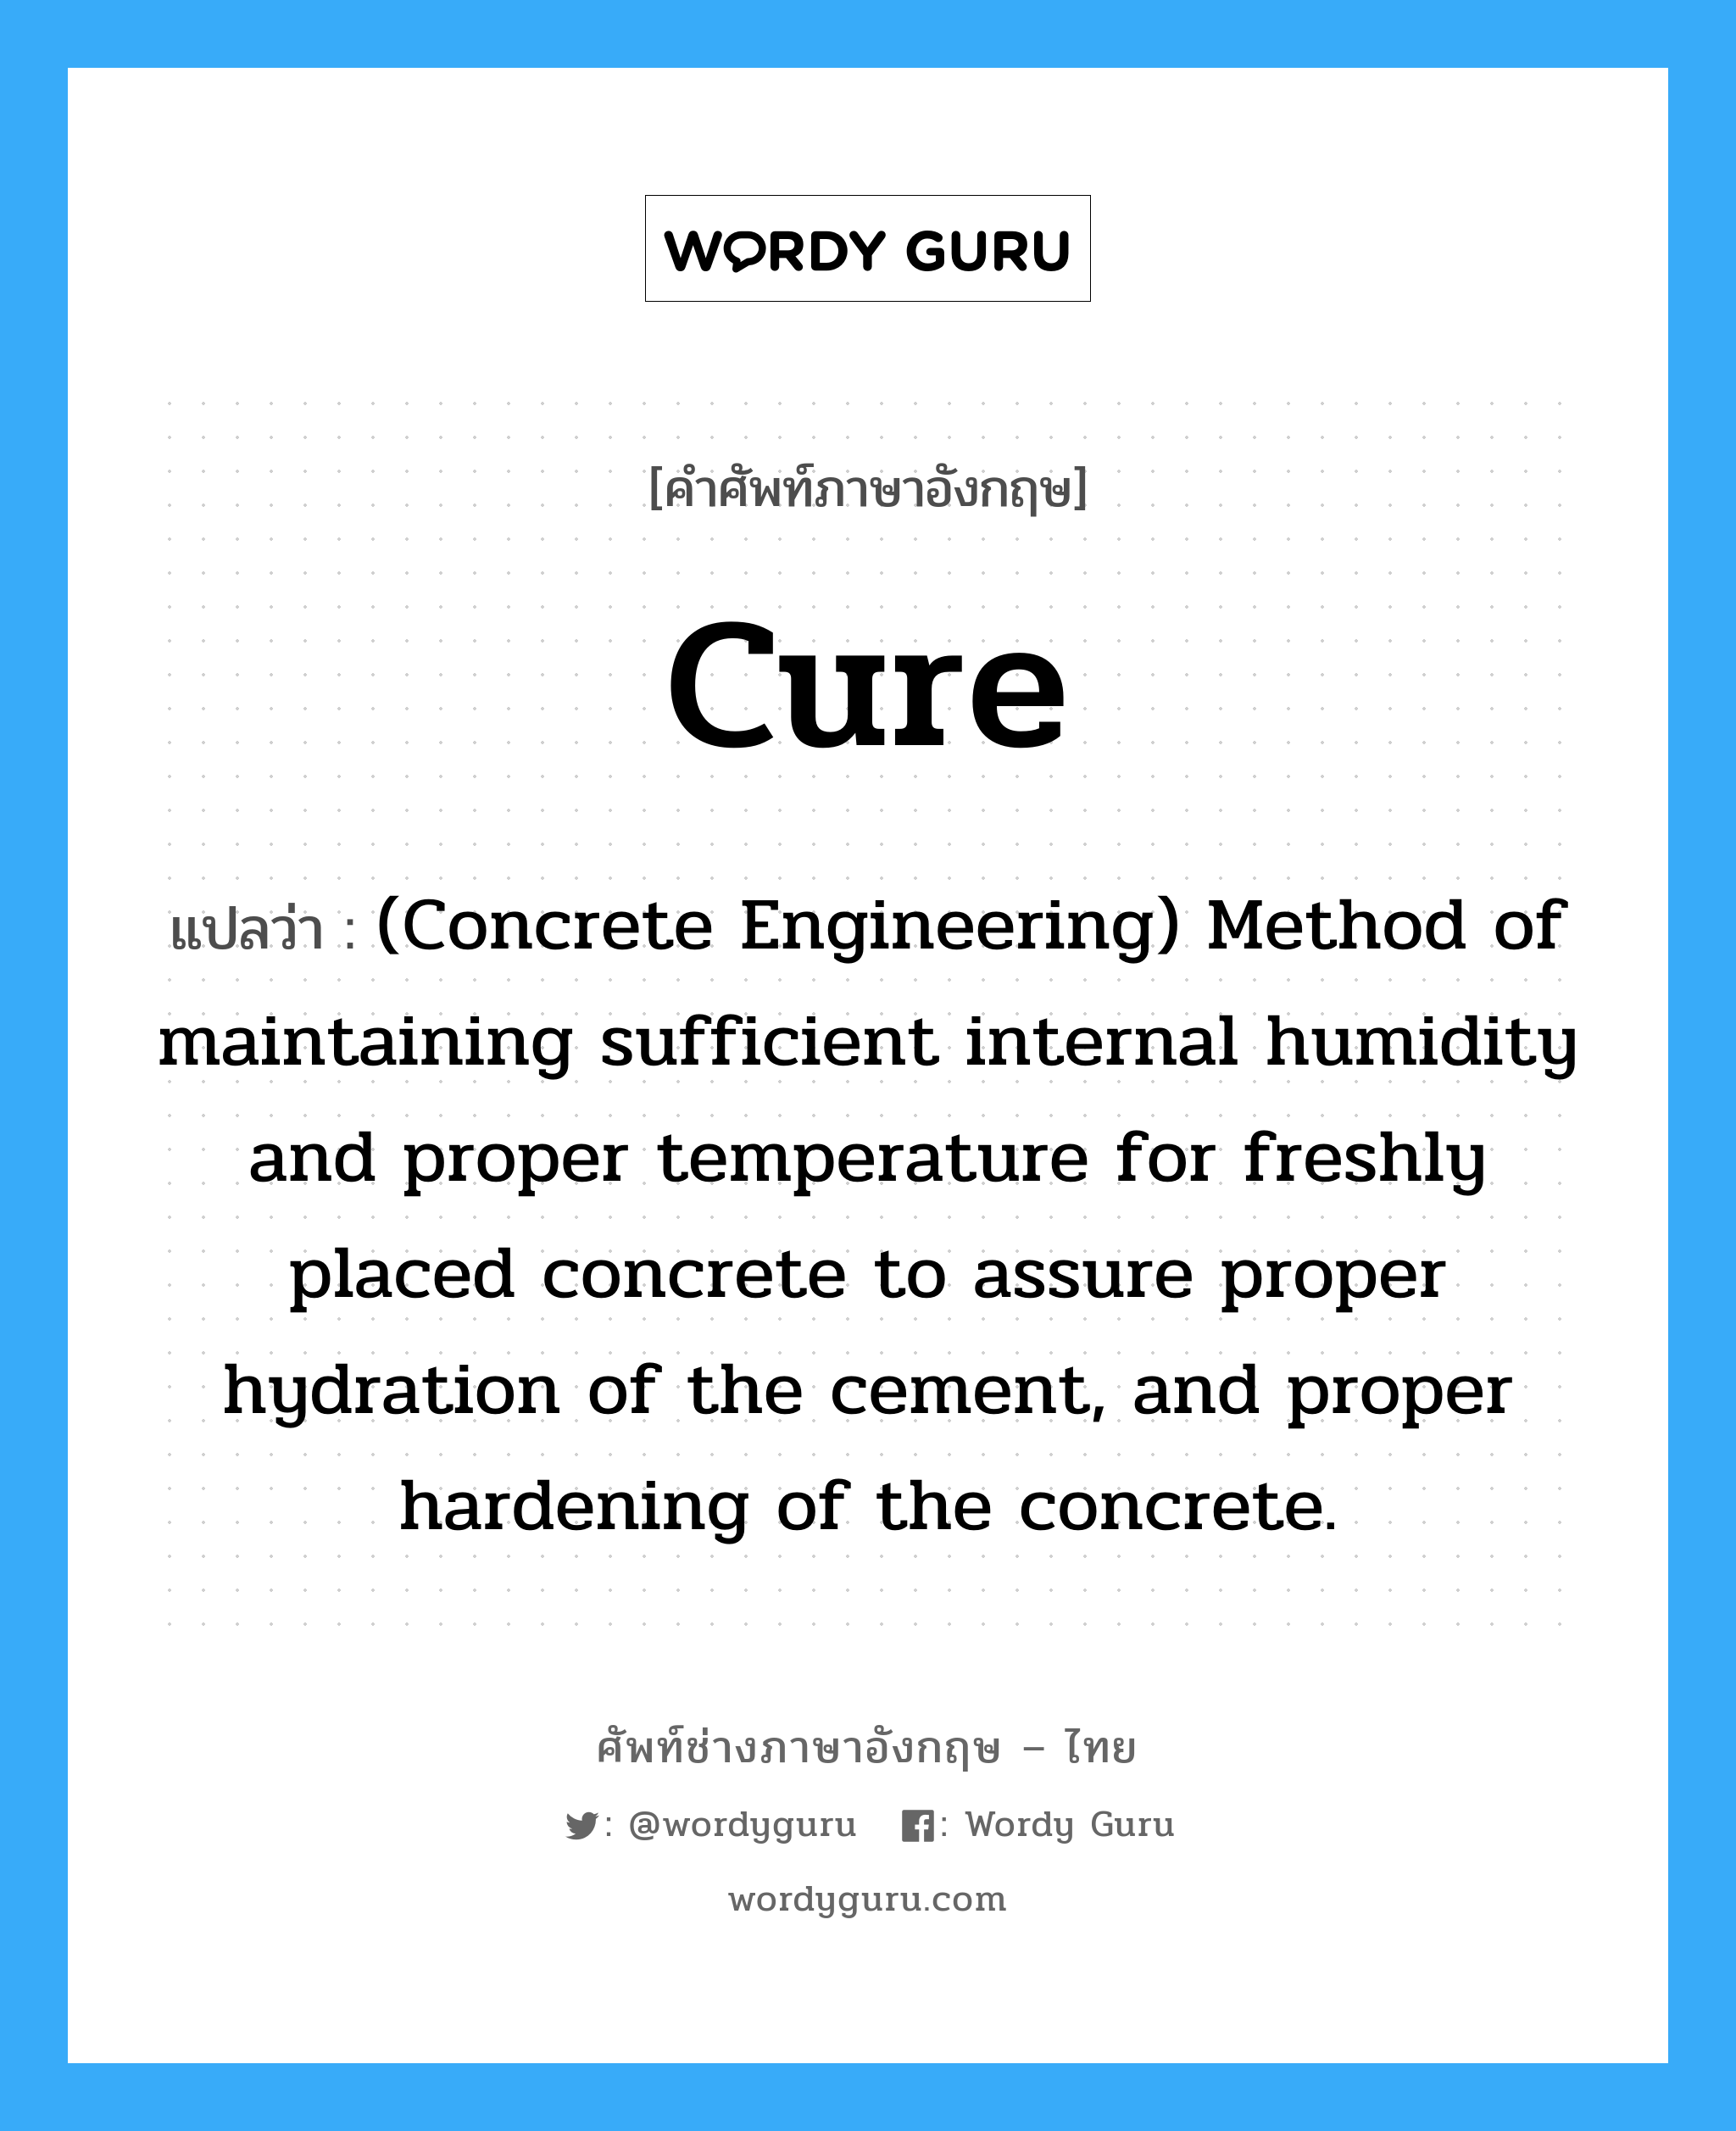 Cure แปลว่า?, คำศัพท์ช่างภาษาอังกฤษ - ไทย Cure คำศัพท์ภาษาอังกฤษ Cure แปลว่า (Concrete Engineering) Method of maintaining sufficient internal humidity and proper temperature for freshly placed concrete to assure proper hydration of the cement, and proper hardening of the concrete.